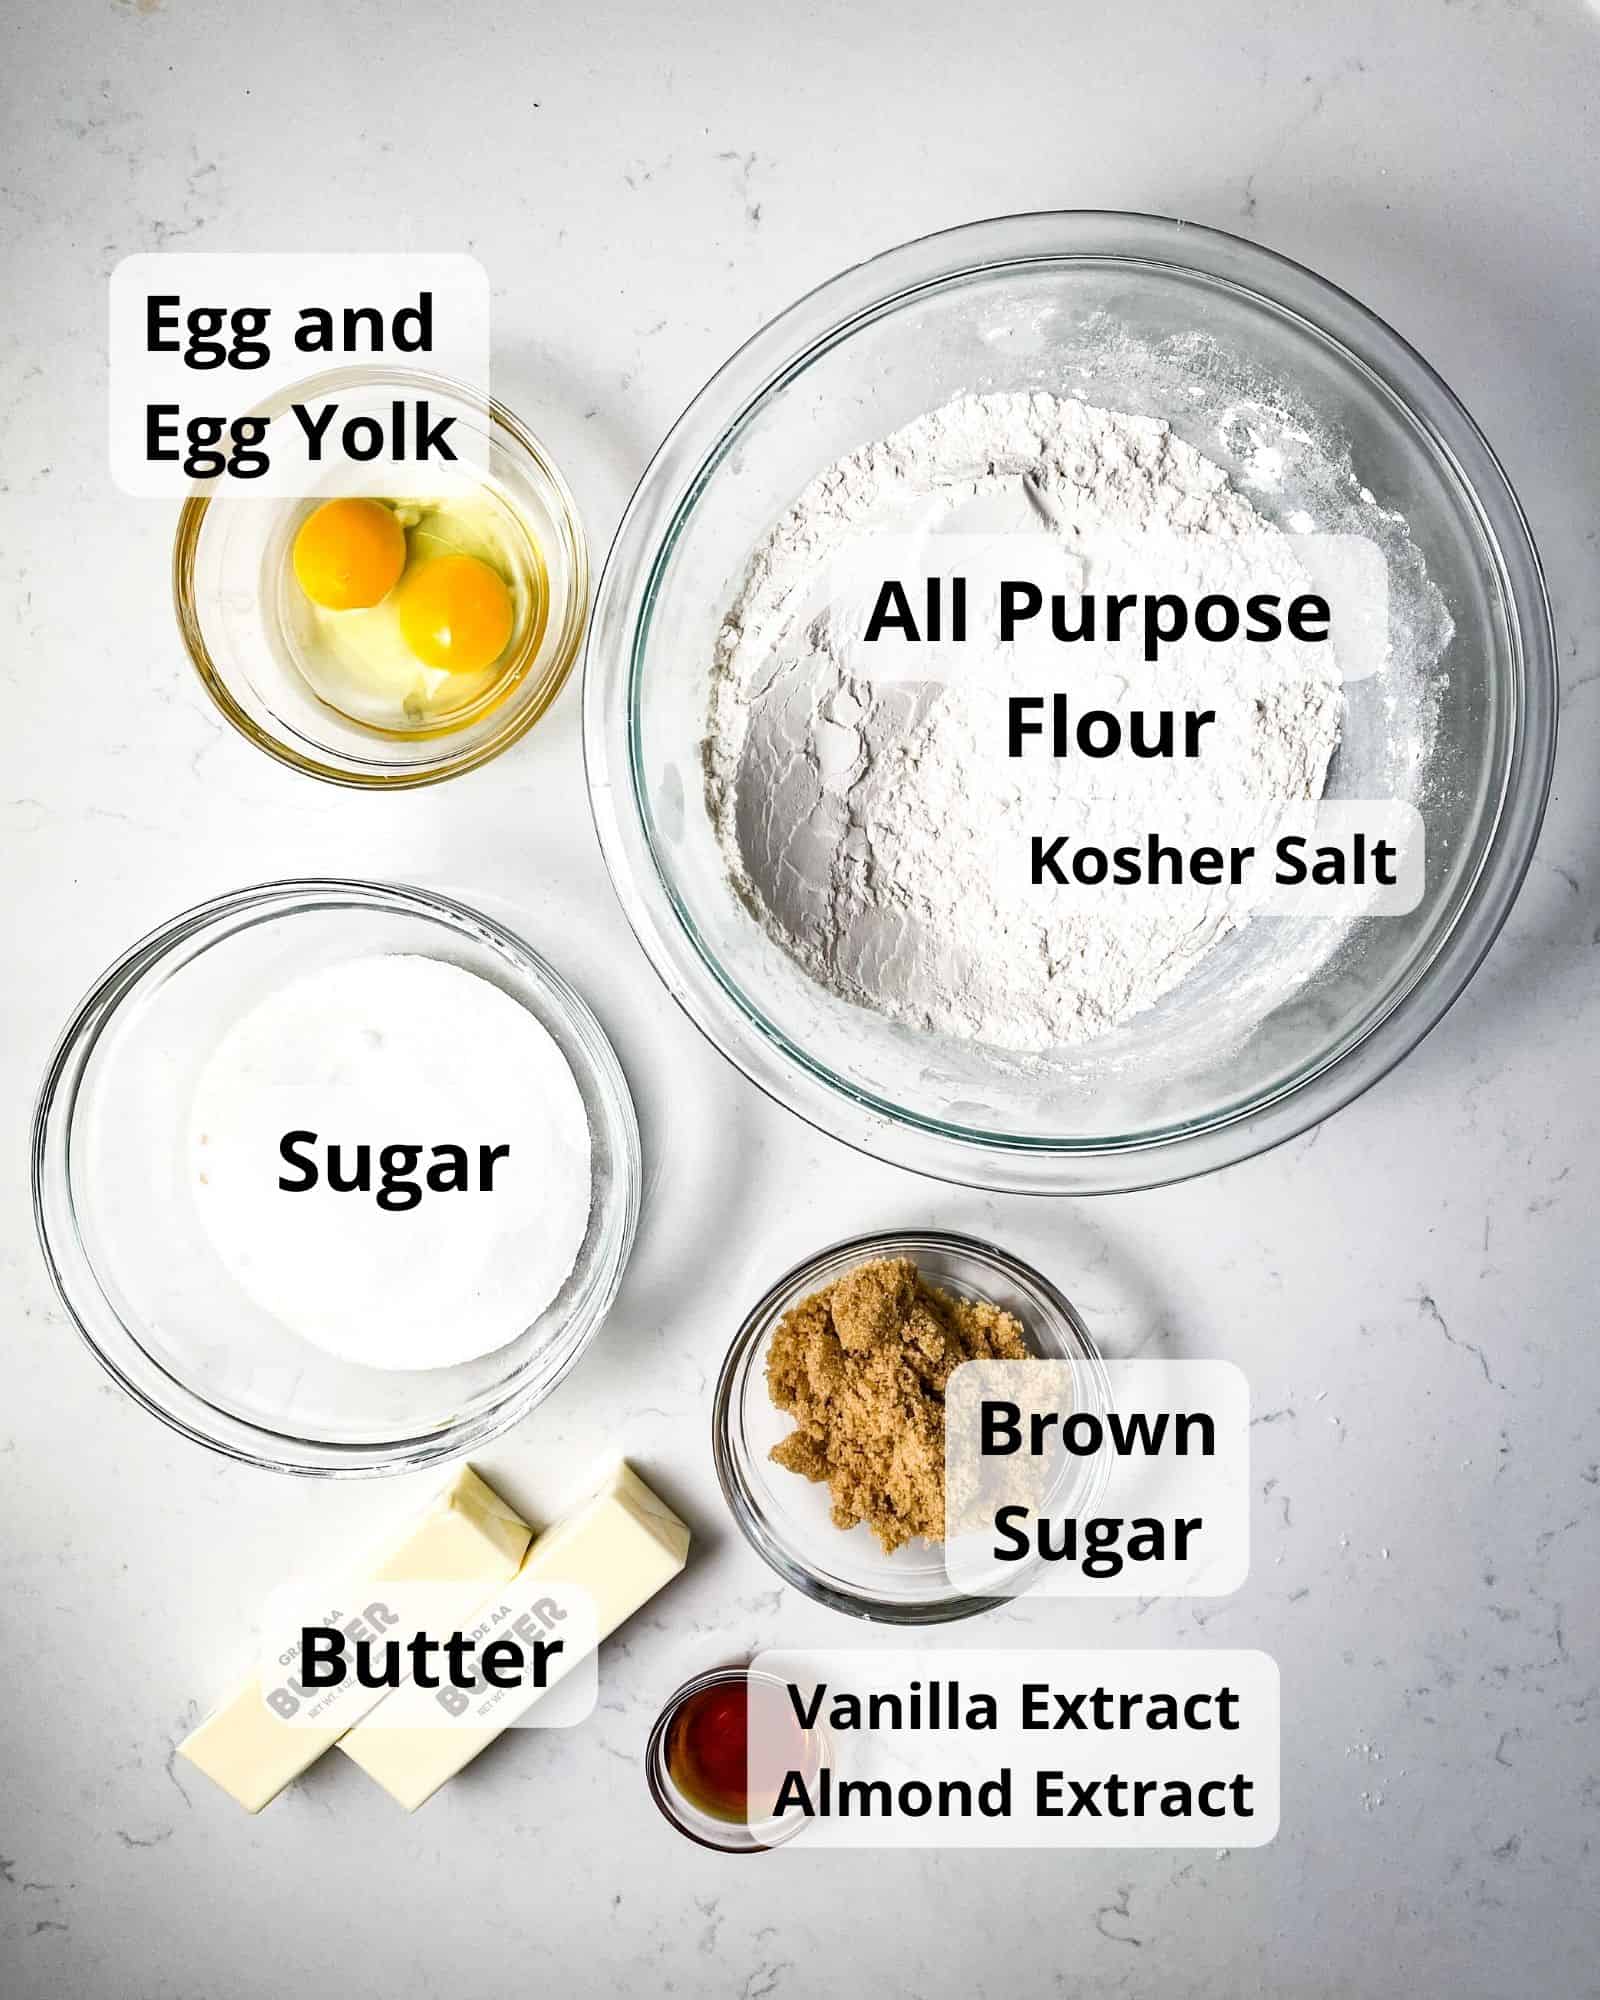 ingredients to make snowflake cookies - flour, salt, egg, egg yolk, sugar, brown sugar, vanilla extract, almond extract, and butter.